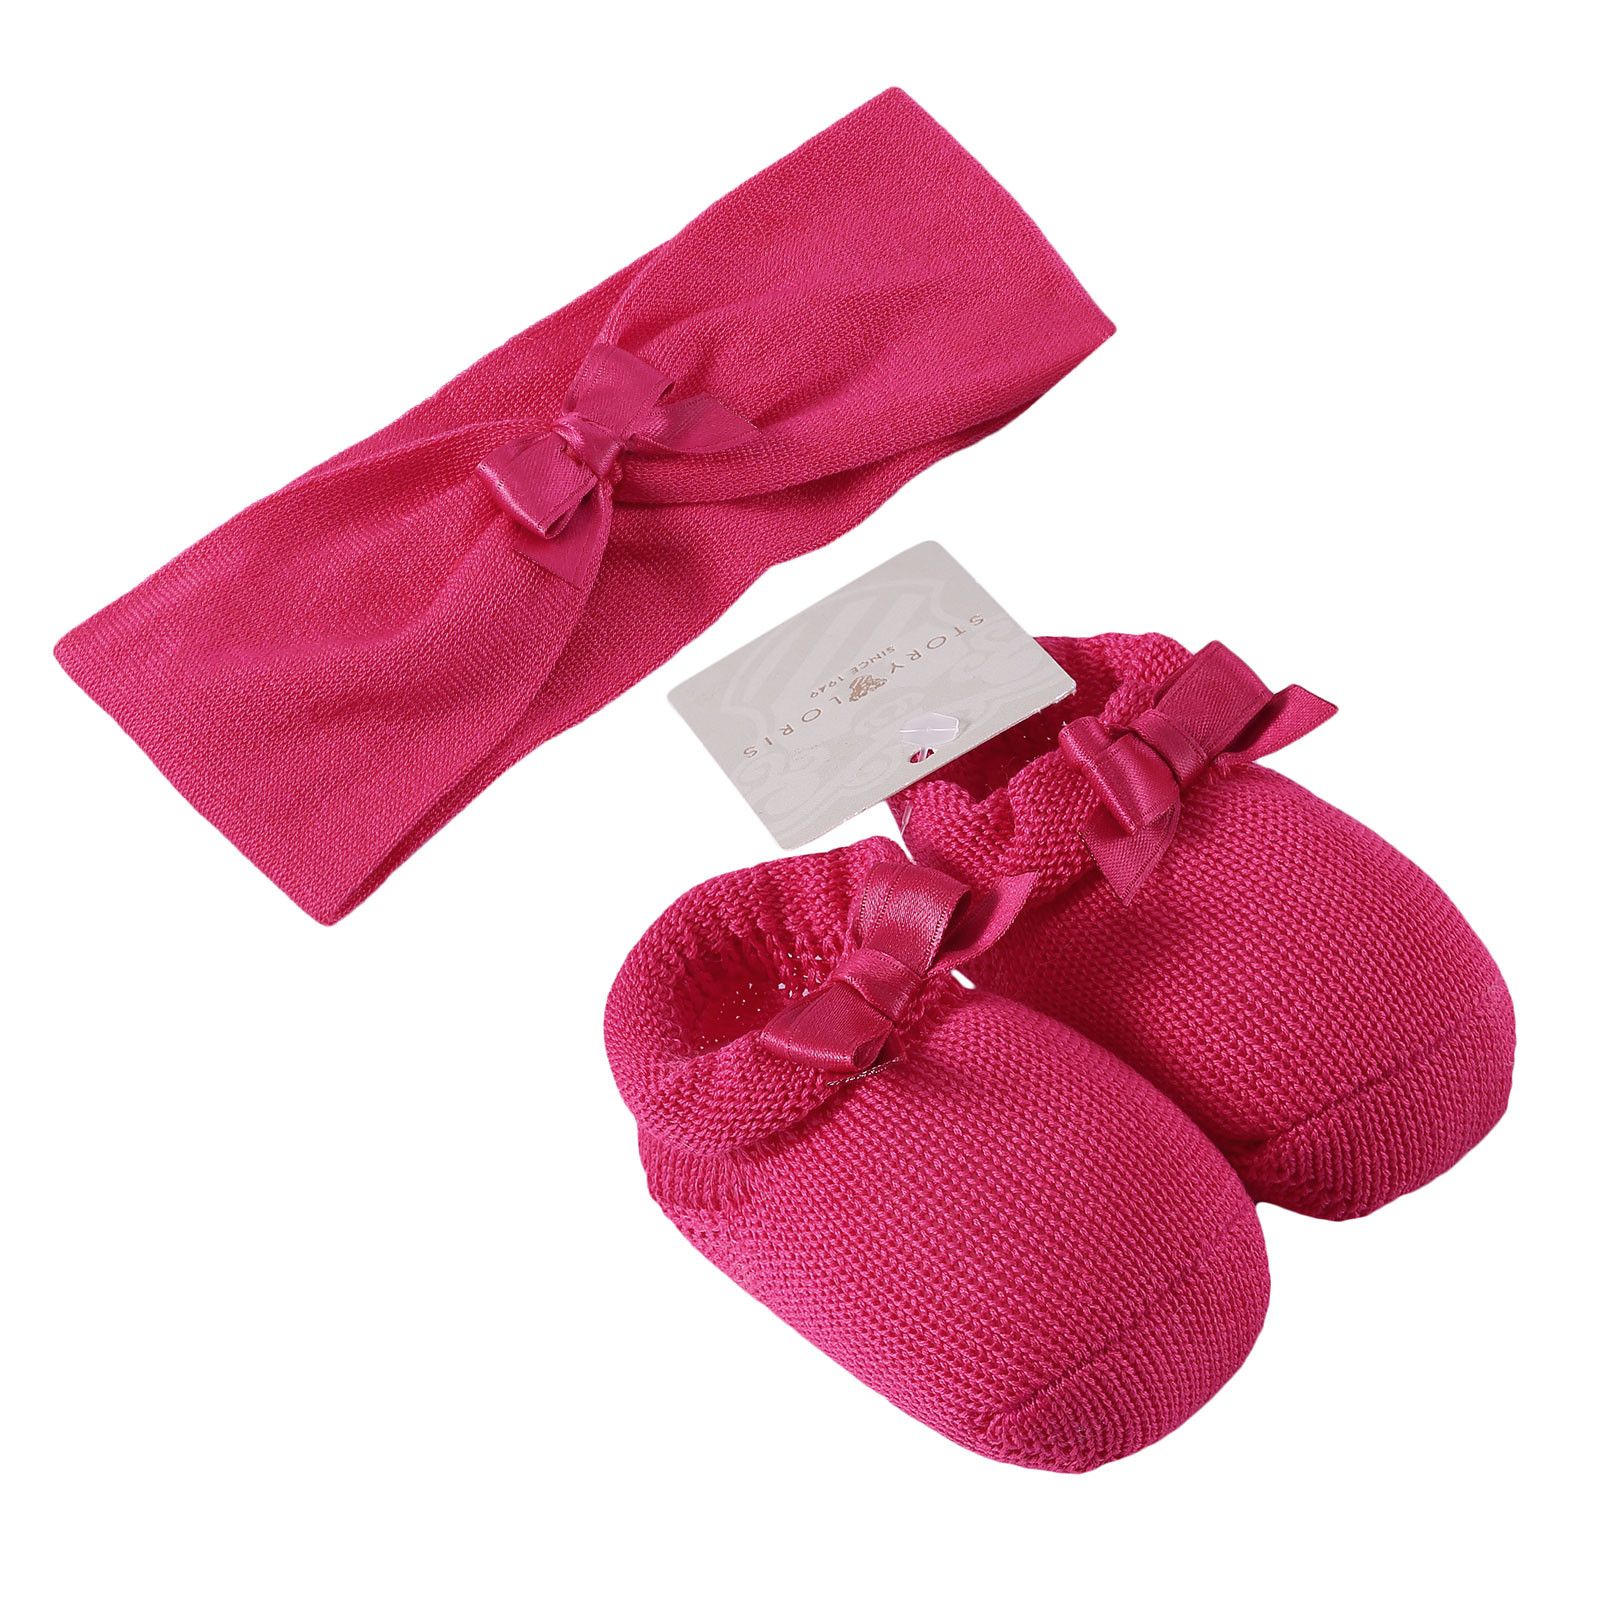 Baby Red Knitted Cotton Shoes & Hair Band Gift Set - CÉMAROSE | Children's Fashion Store - 1